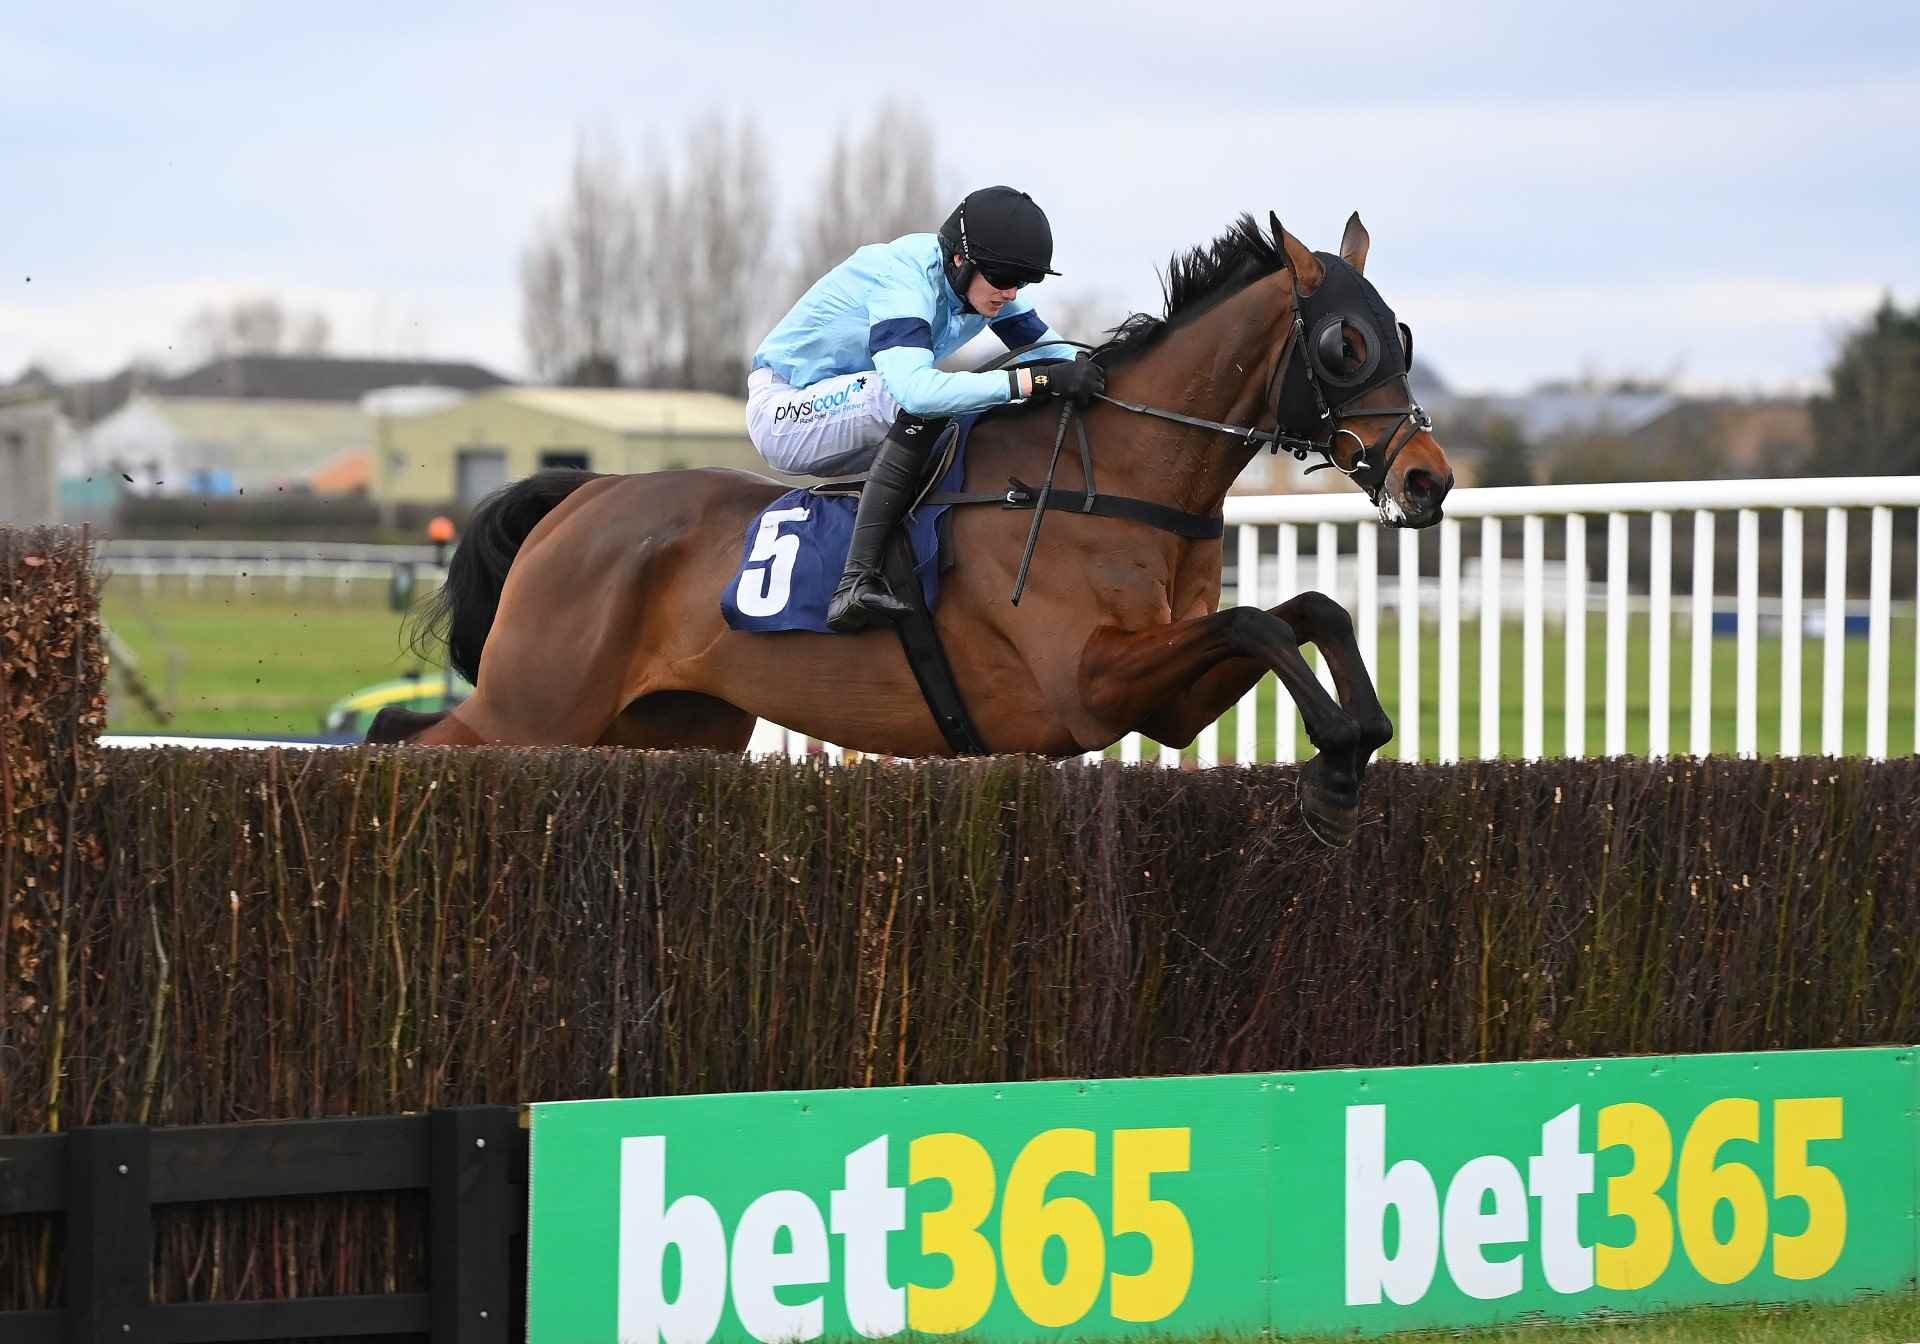 Mount Tempest winning the William Hill Epic Value Handicap Chase at Wetherby